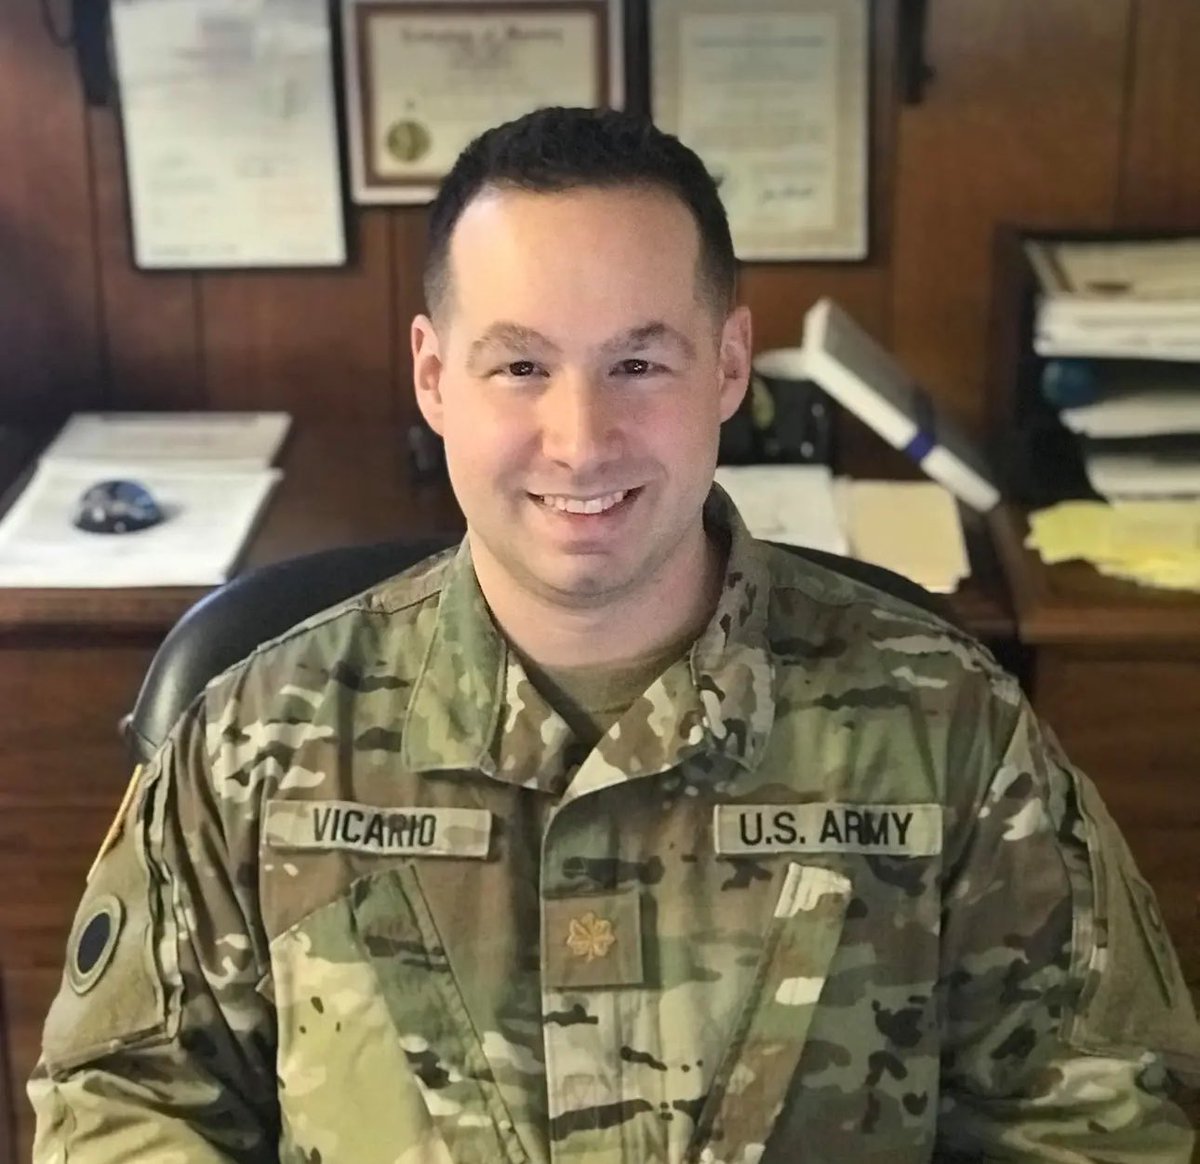 A high ranking Ohio National Guard officer has been arrested for 3 counts of raping a minor & tampering with evidence. He used force/threats of force to rape the child on multiple occasions. Meet Officer Steven M. Vicario.